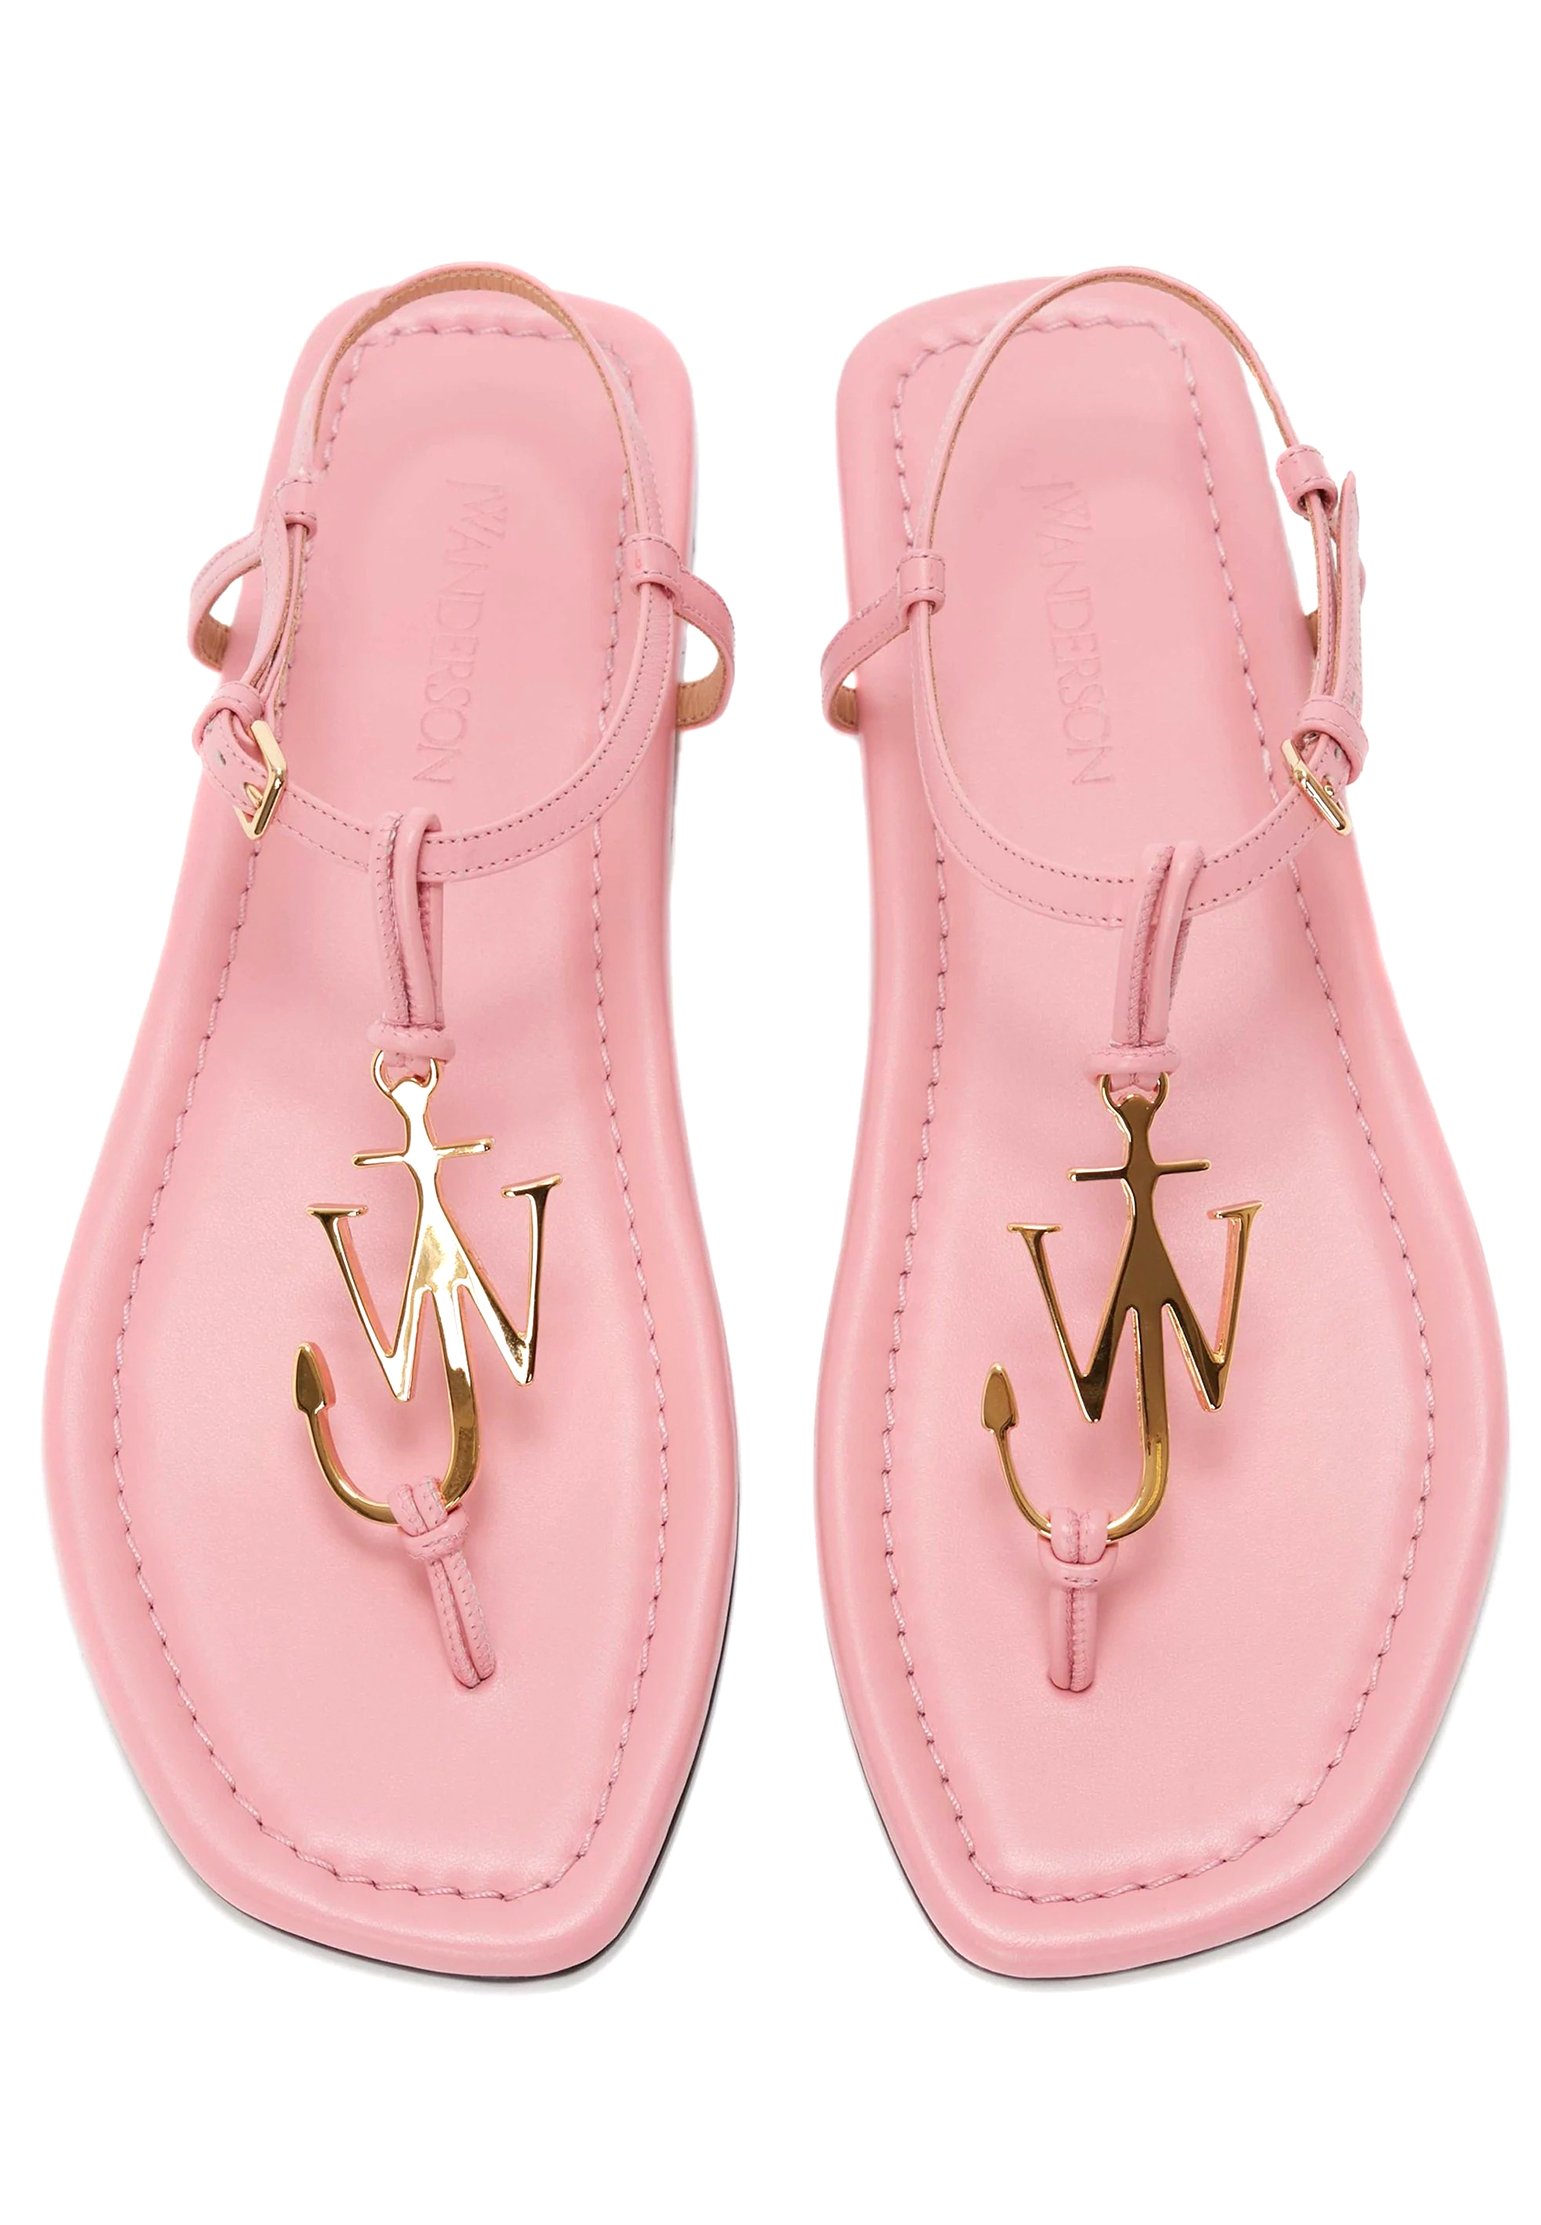 Sandals J.W. ANDERSON Color: pink (Code: 738) in online store Allure